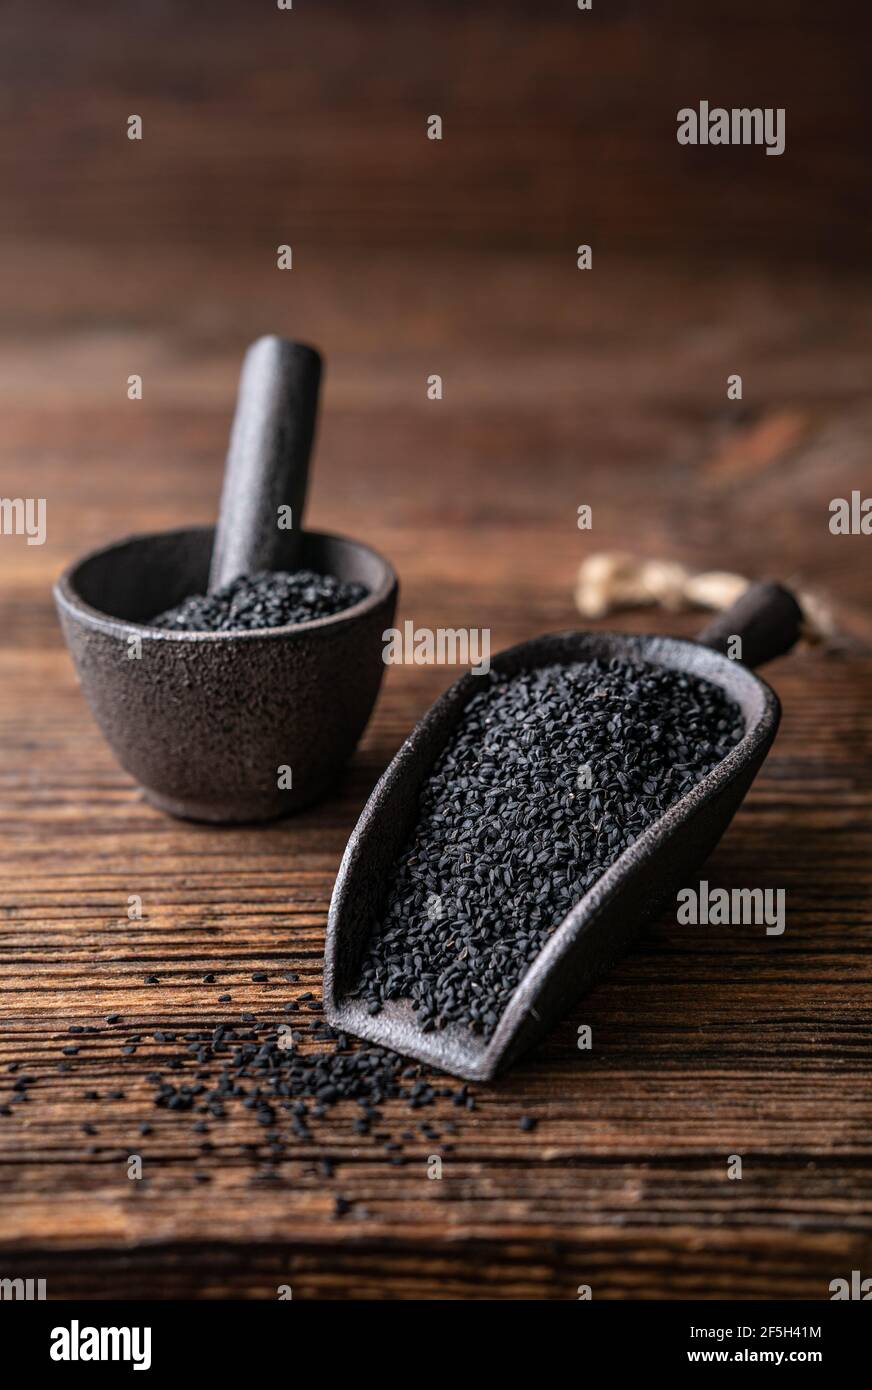 Nigella sativa seeds also known as black cumin, kalo jeera, kalonji and black caraway in iron scoop and mortar on rustic wooden background Stock Photo